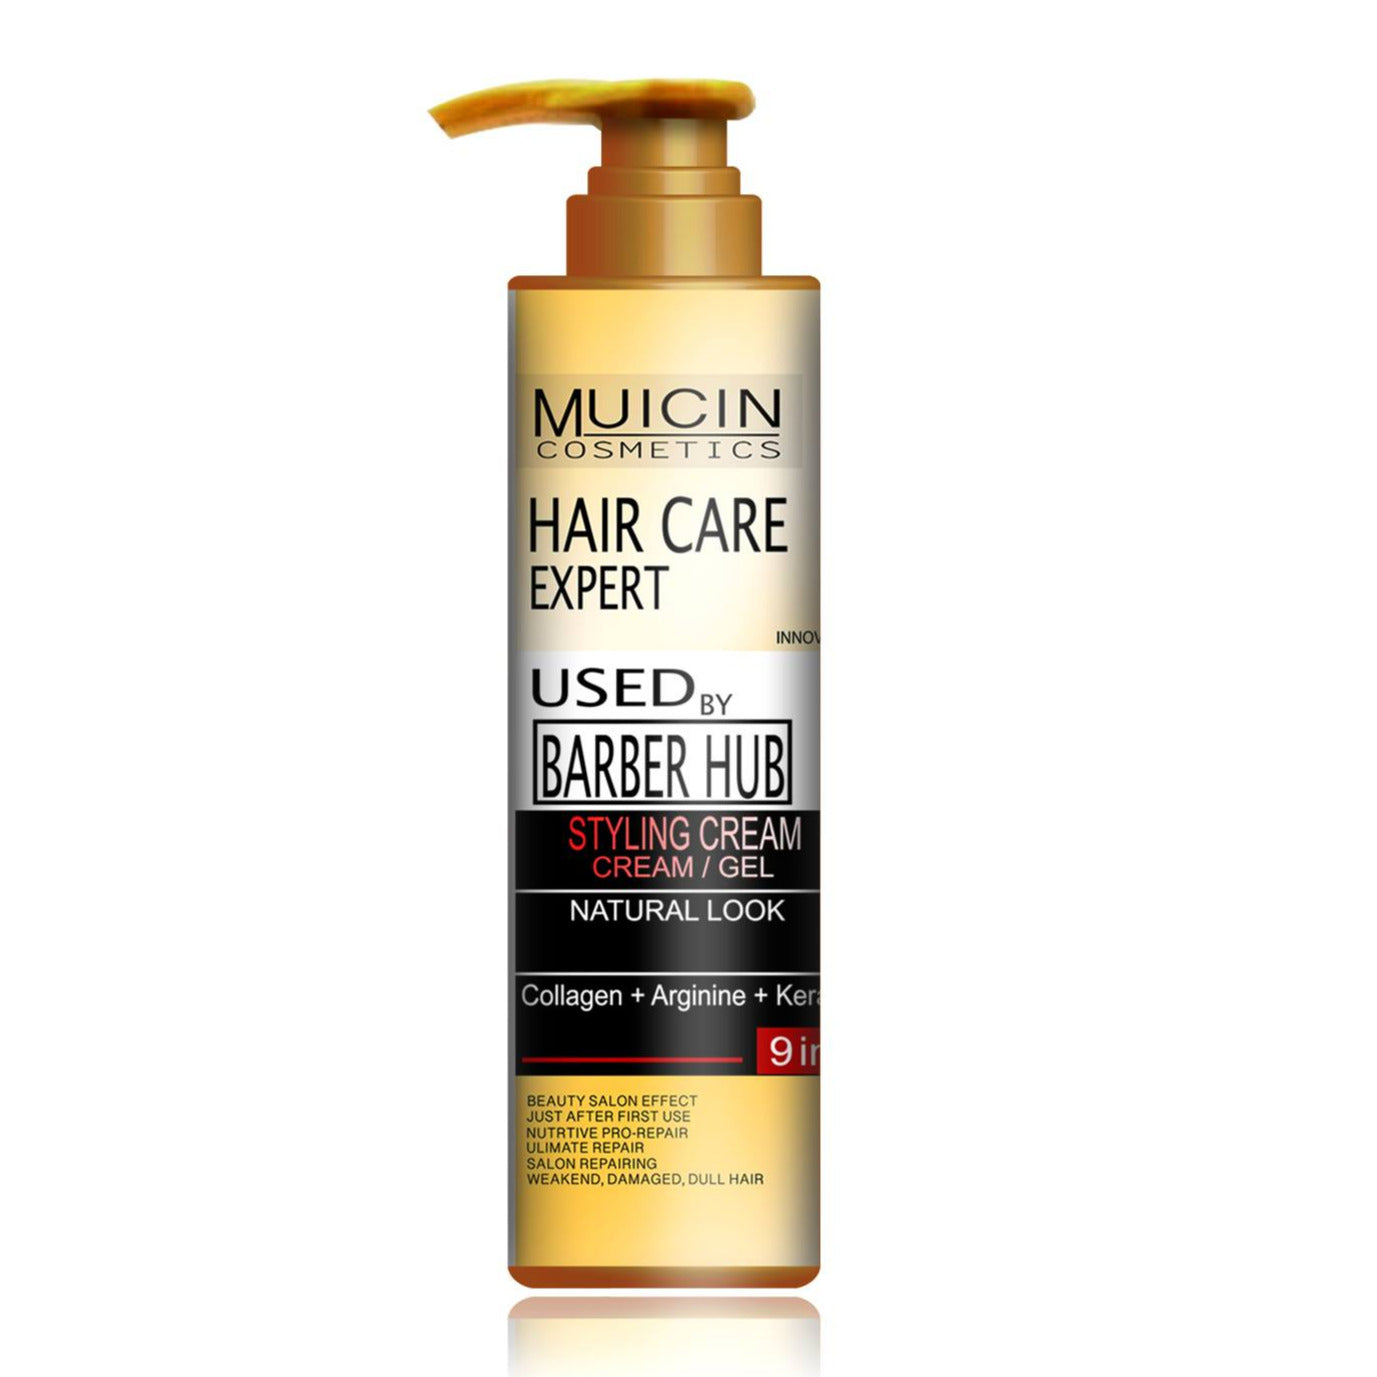 Buy  MUICIN - Hair Care Expert Hair Styling Cream - at Best Price Online in Pakistan